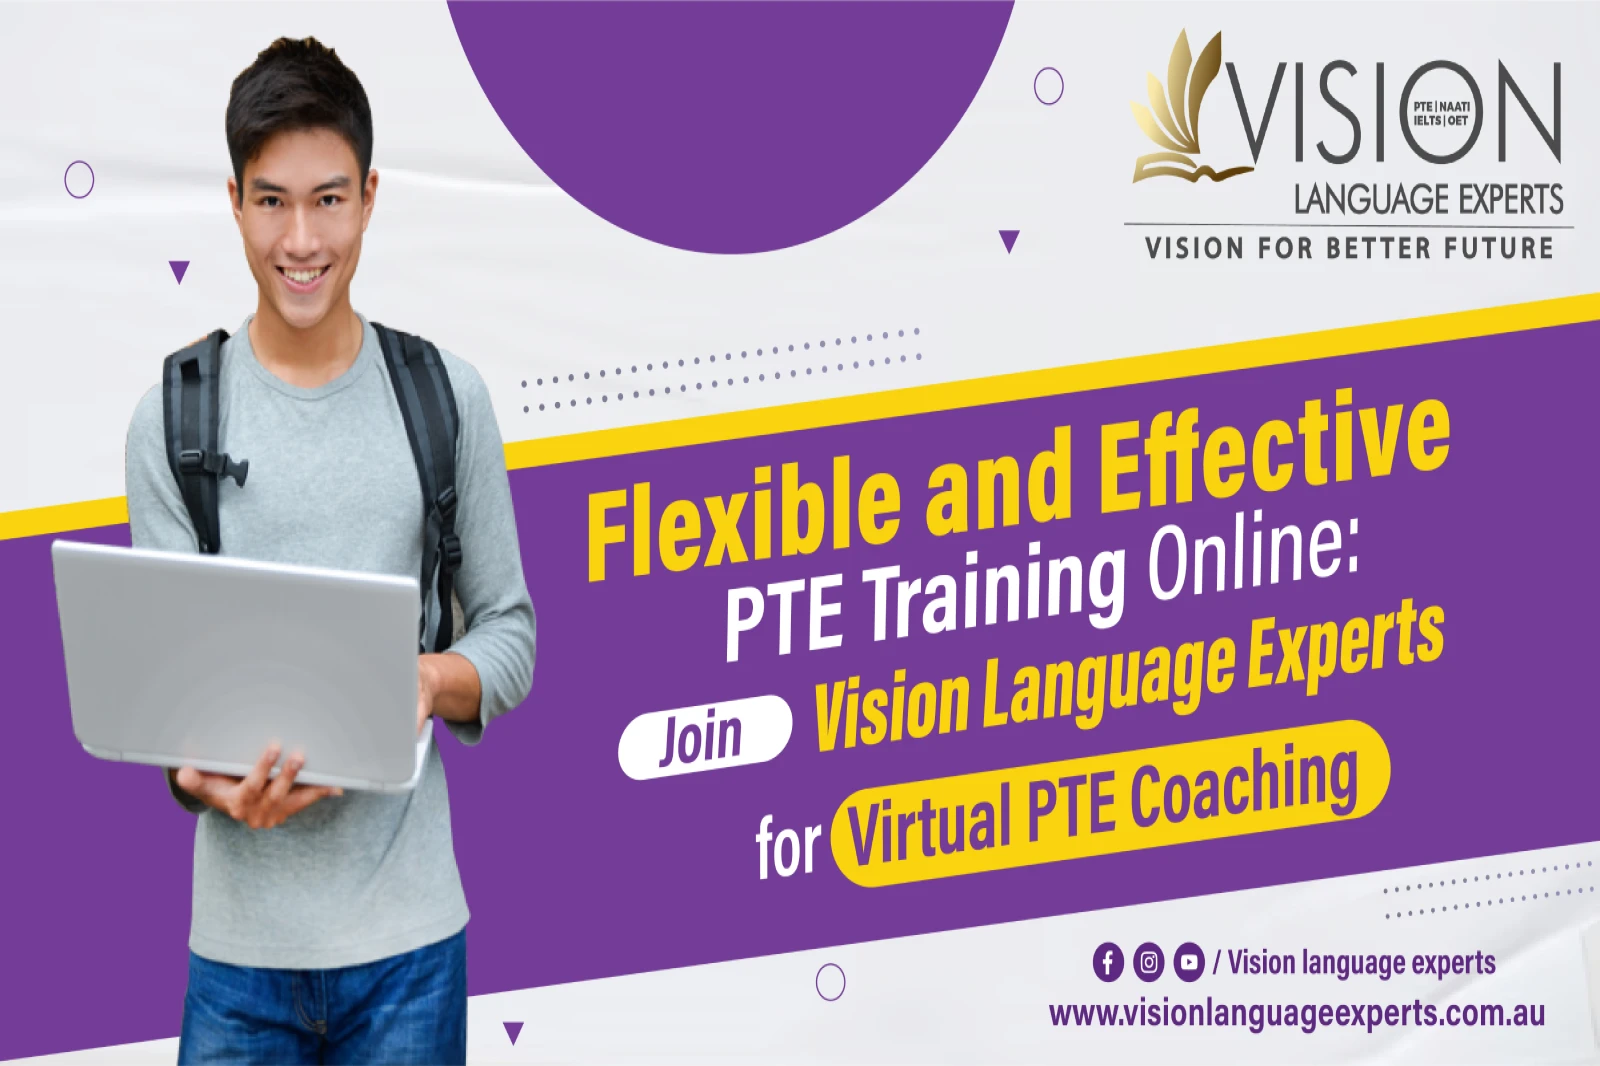 How can I prepare for PTE online?